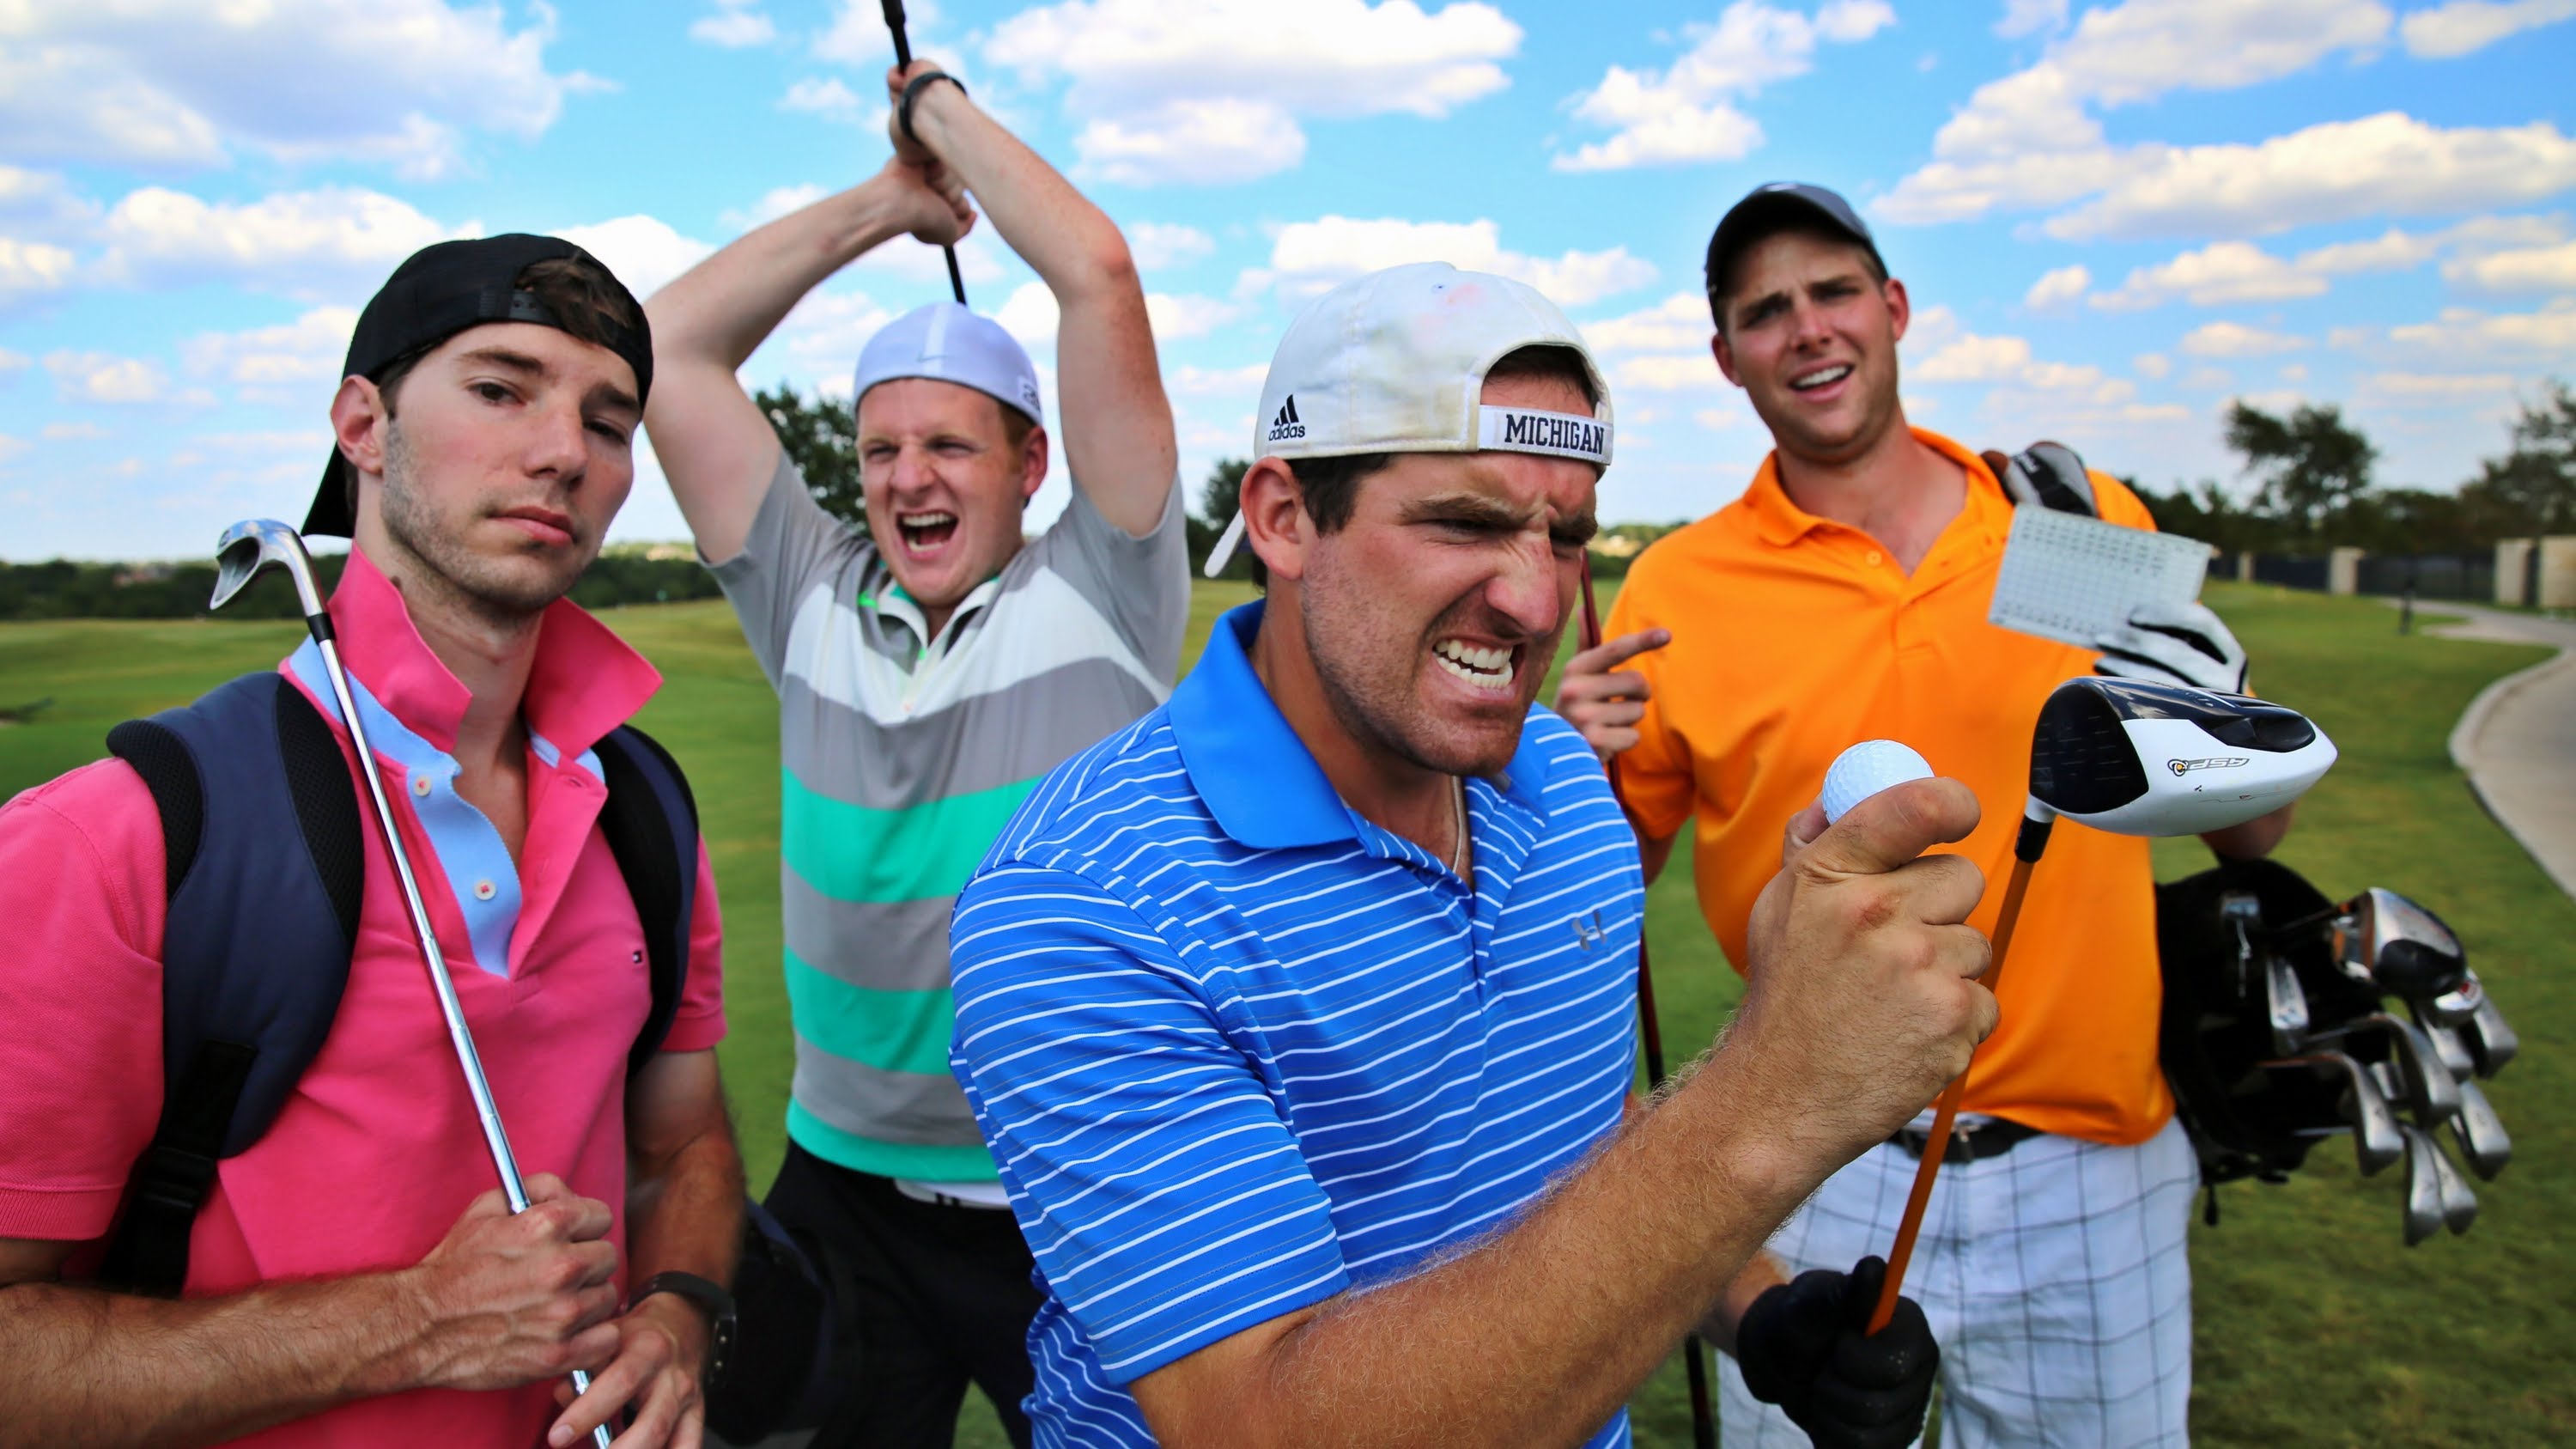 If you don't recognise these golfers - you're one of them...